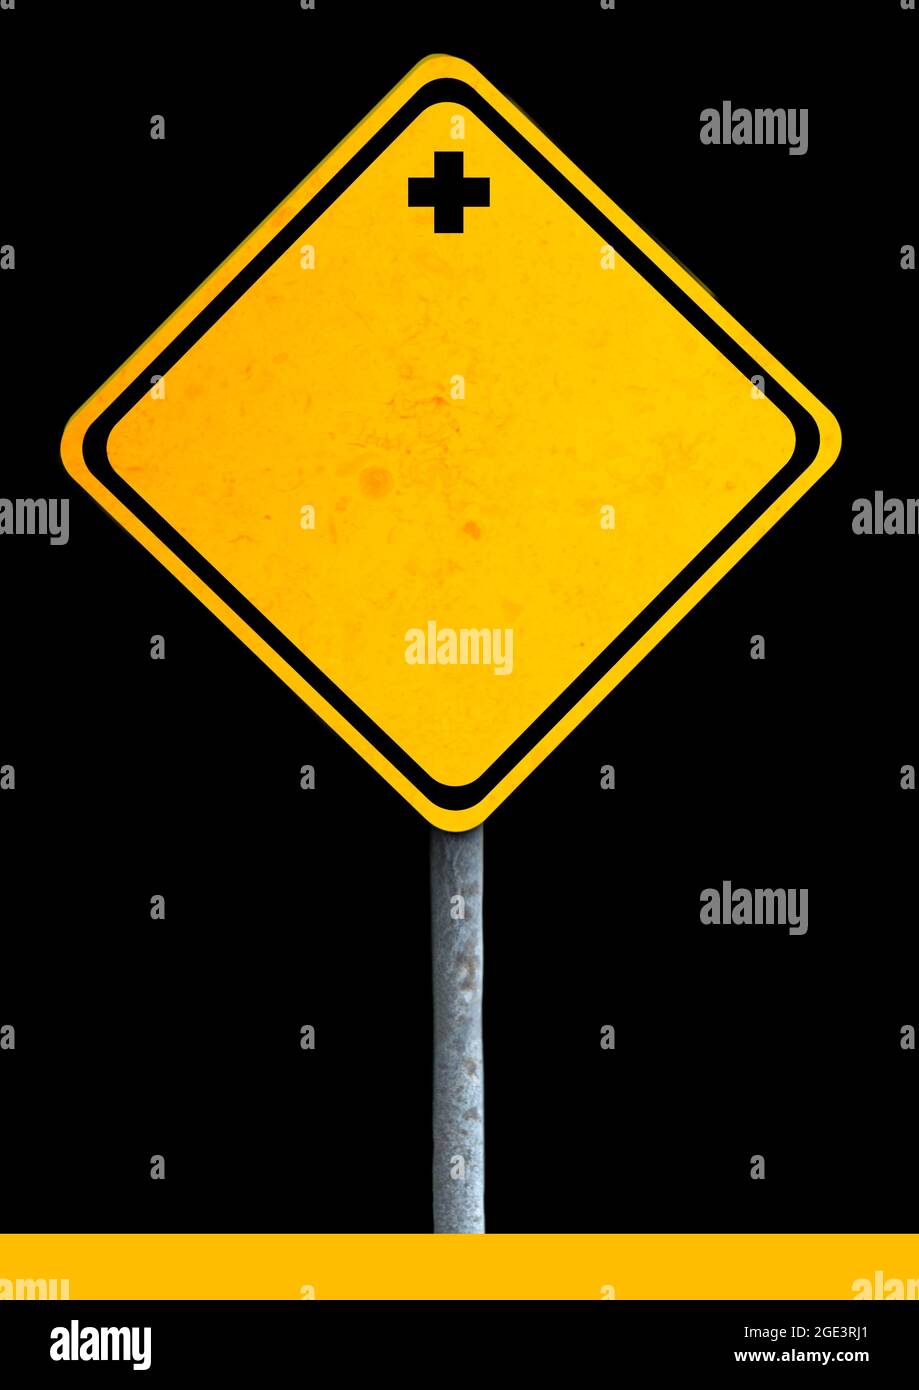 Composition of yellow warning sign over black background Stock Photo